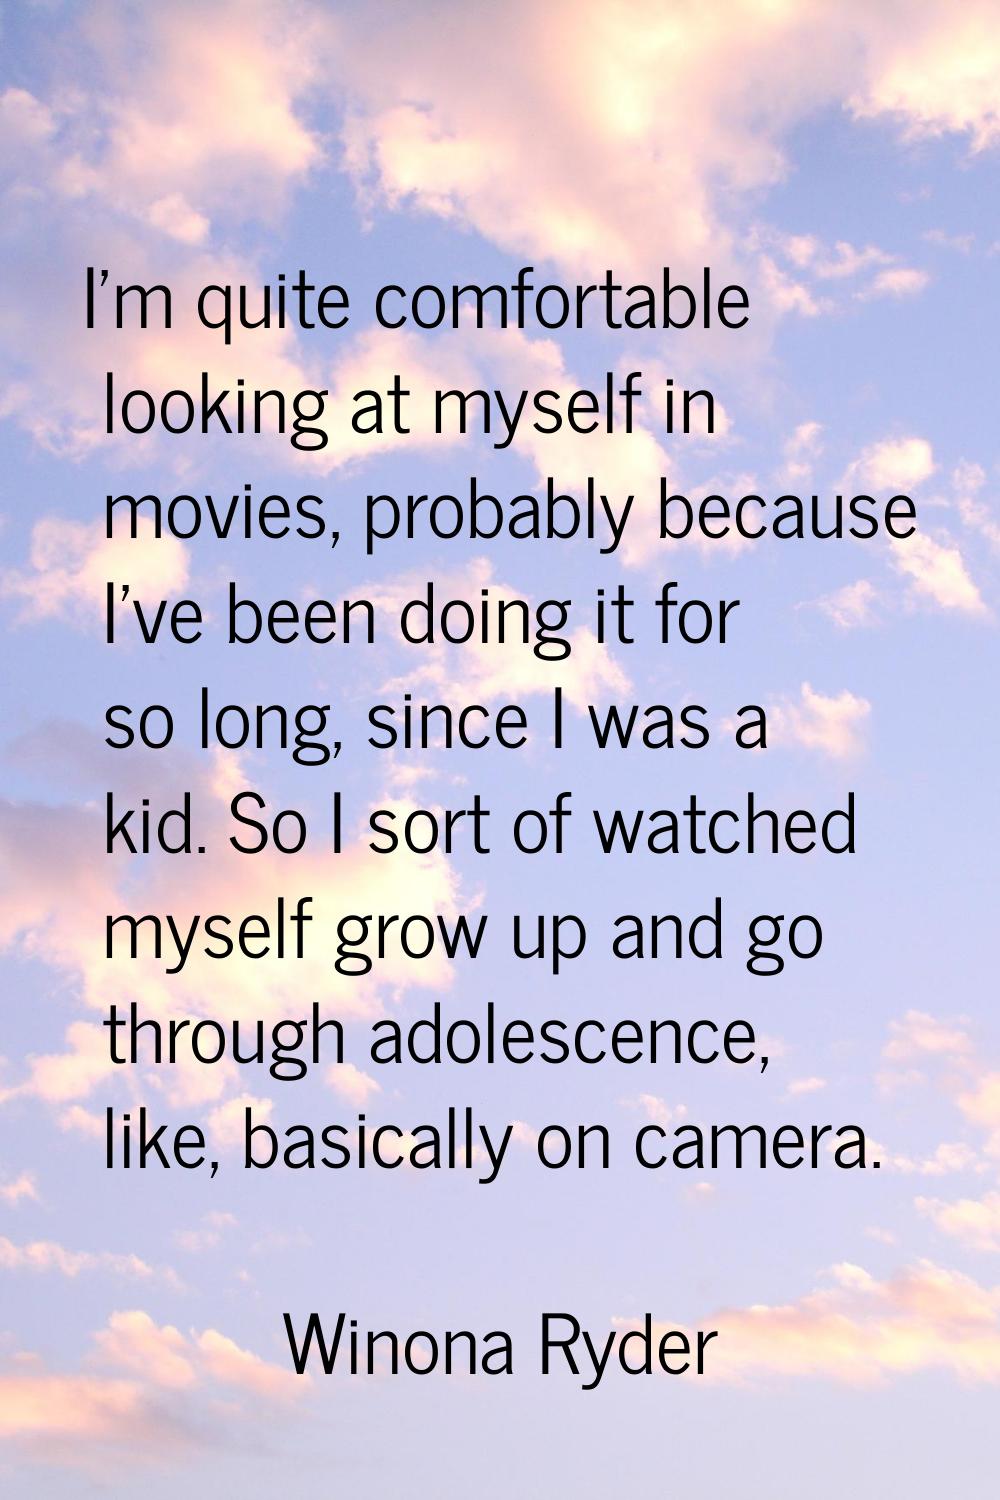 I'm quite comfortable looking at myself in movies, probably because I've been doing it for so long,